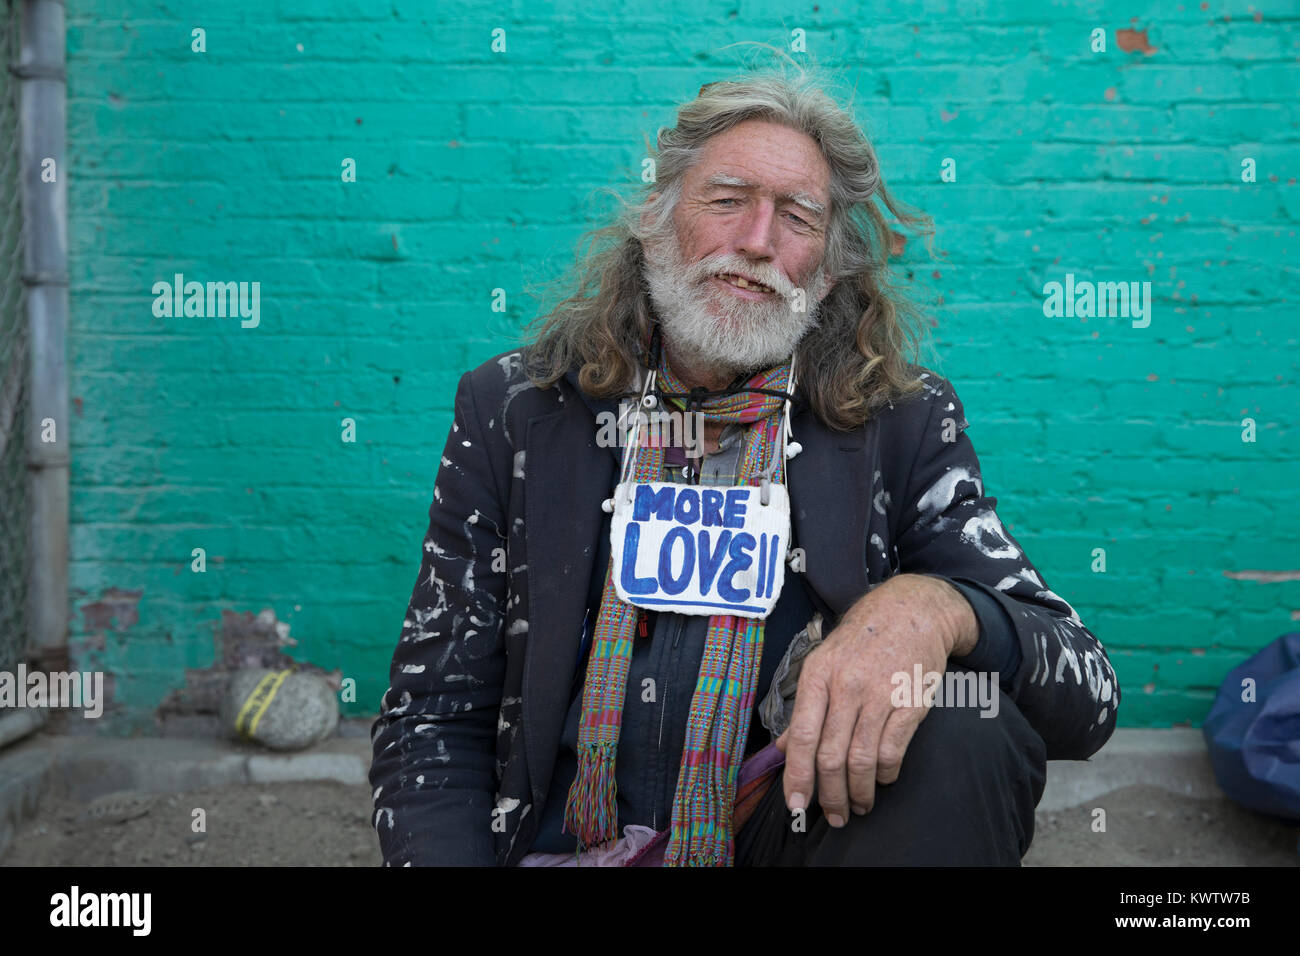 David Busch, homeless man in Los Angeles with 'More Love' sign around his neck. Stock Photo